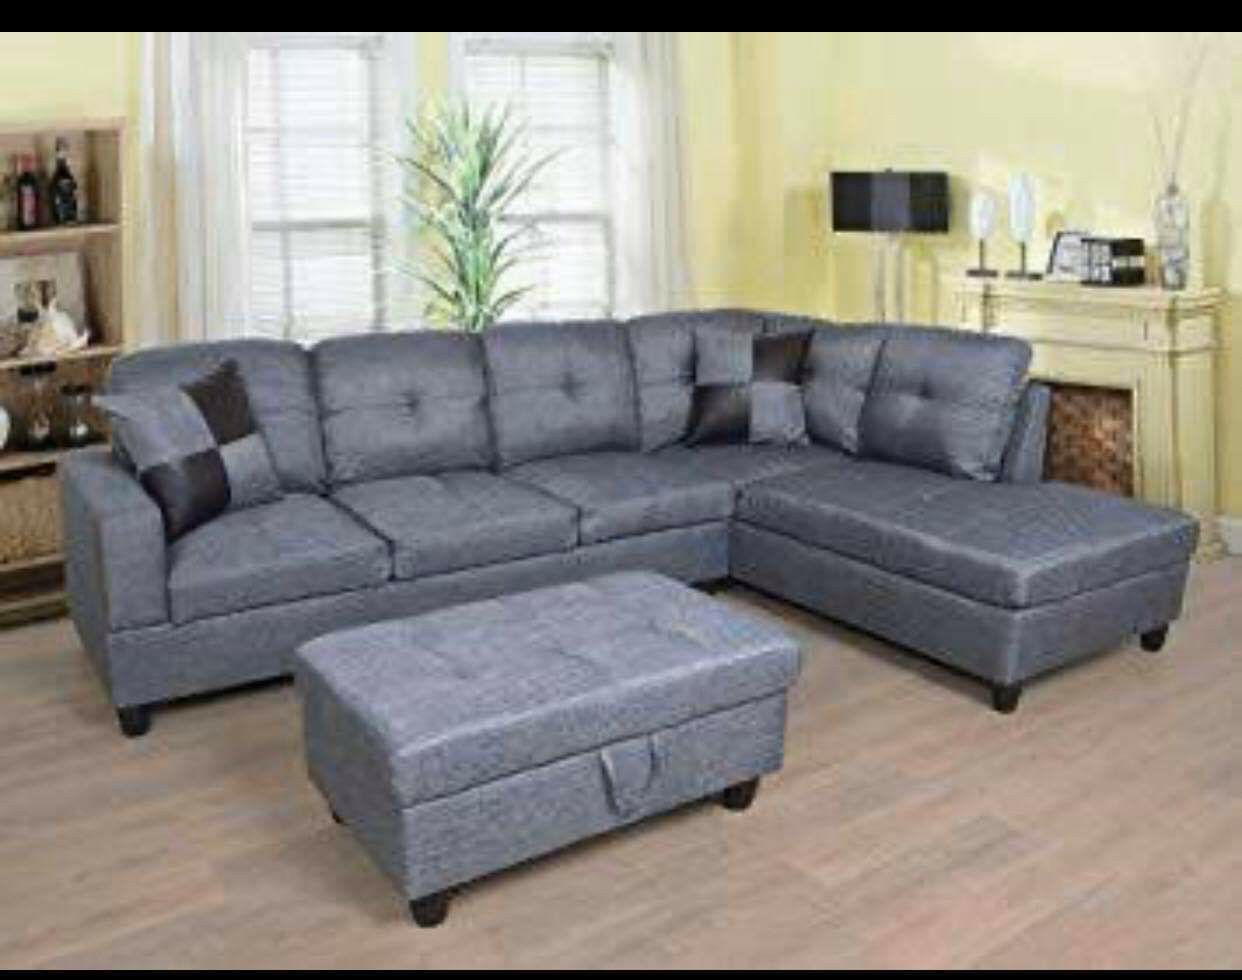 Brand new sectional couch set furniture